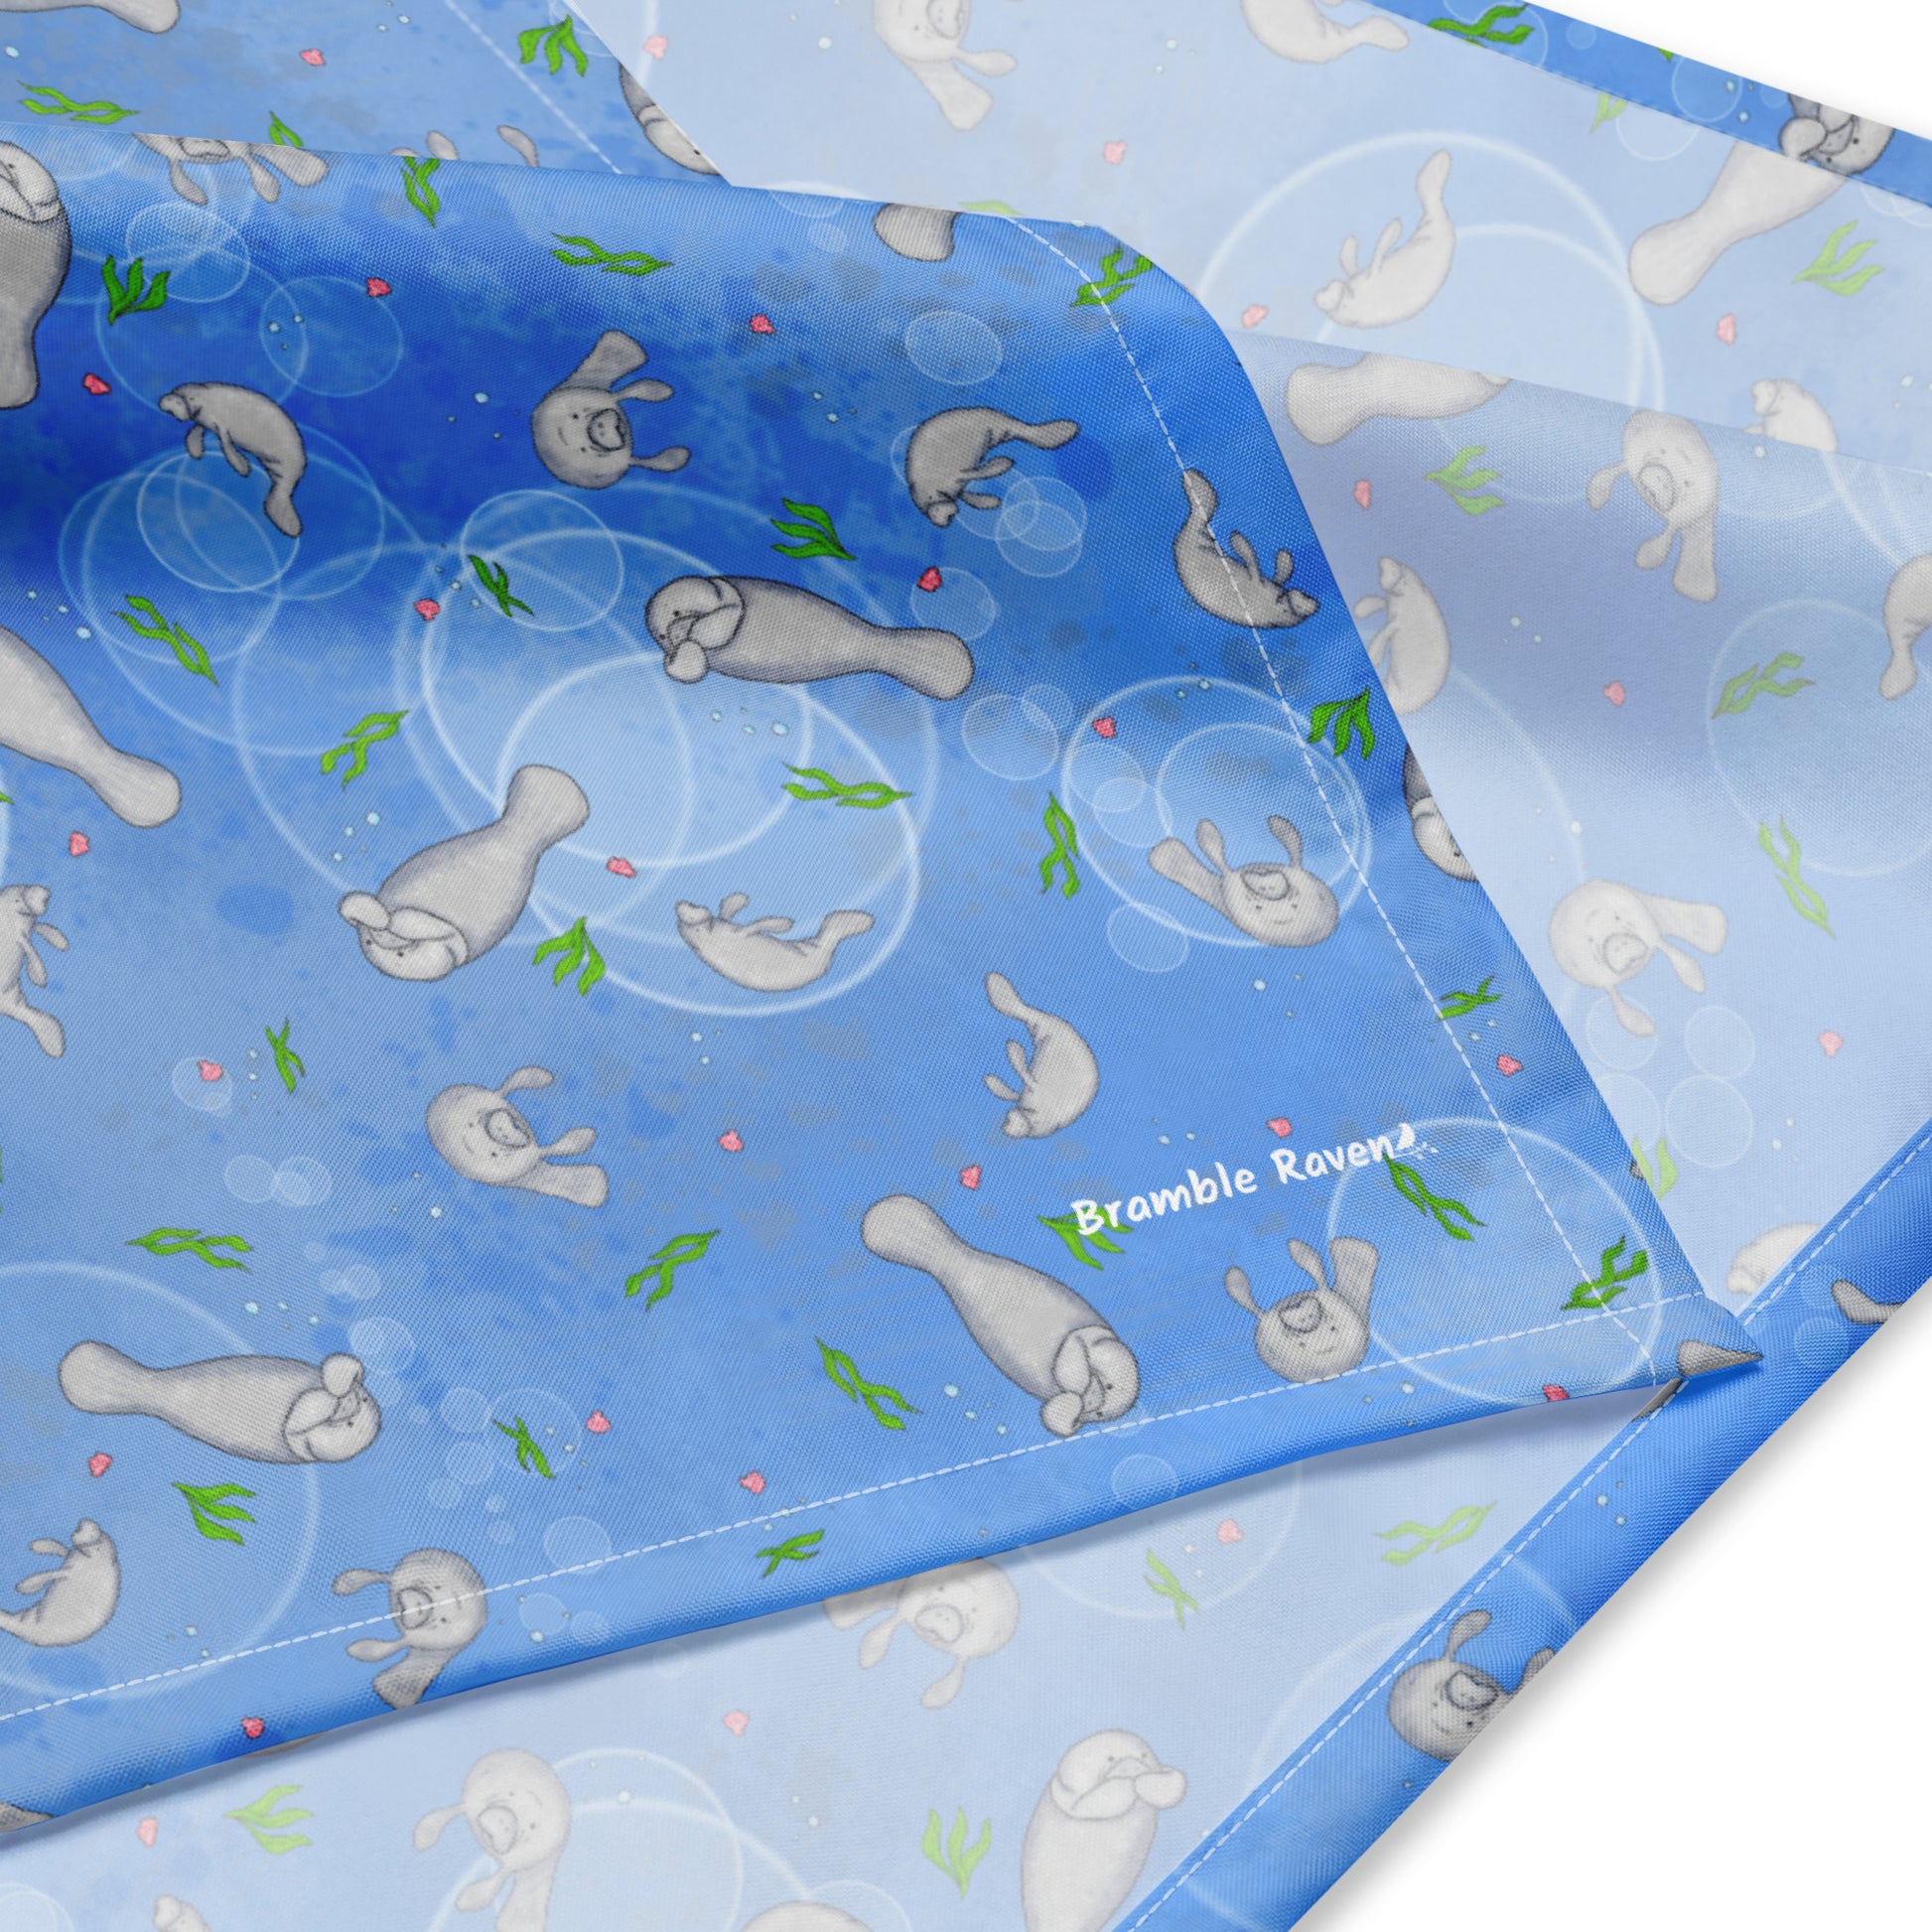 Manatee bandana. Features patterned design of hand-illustrated manatees, seaweed, seashells, and bubbles on a blue  background. Made of microfiber polyester fabric.